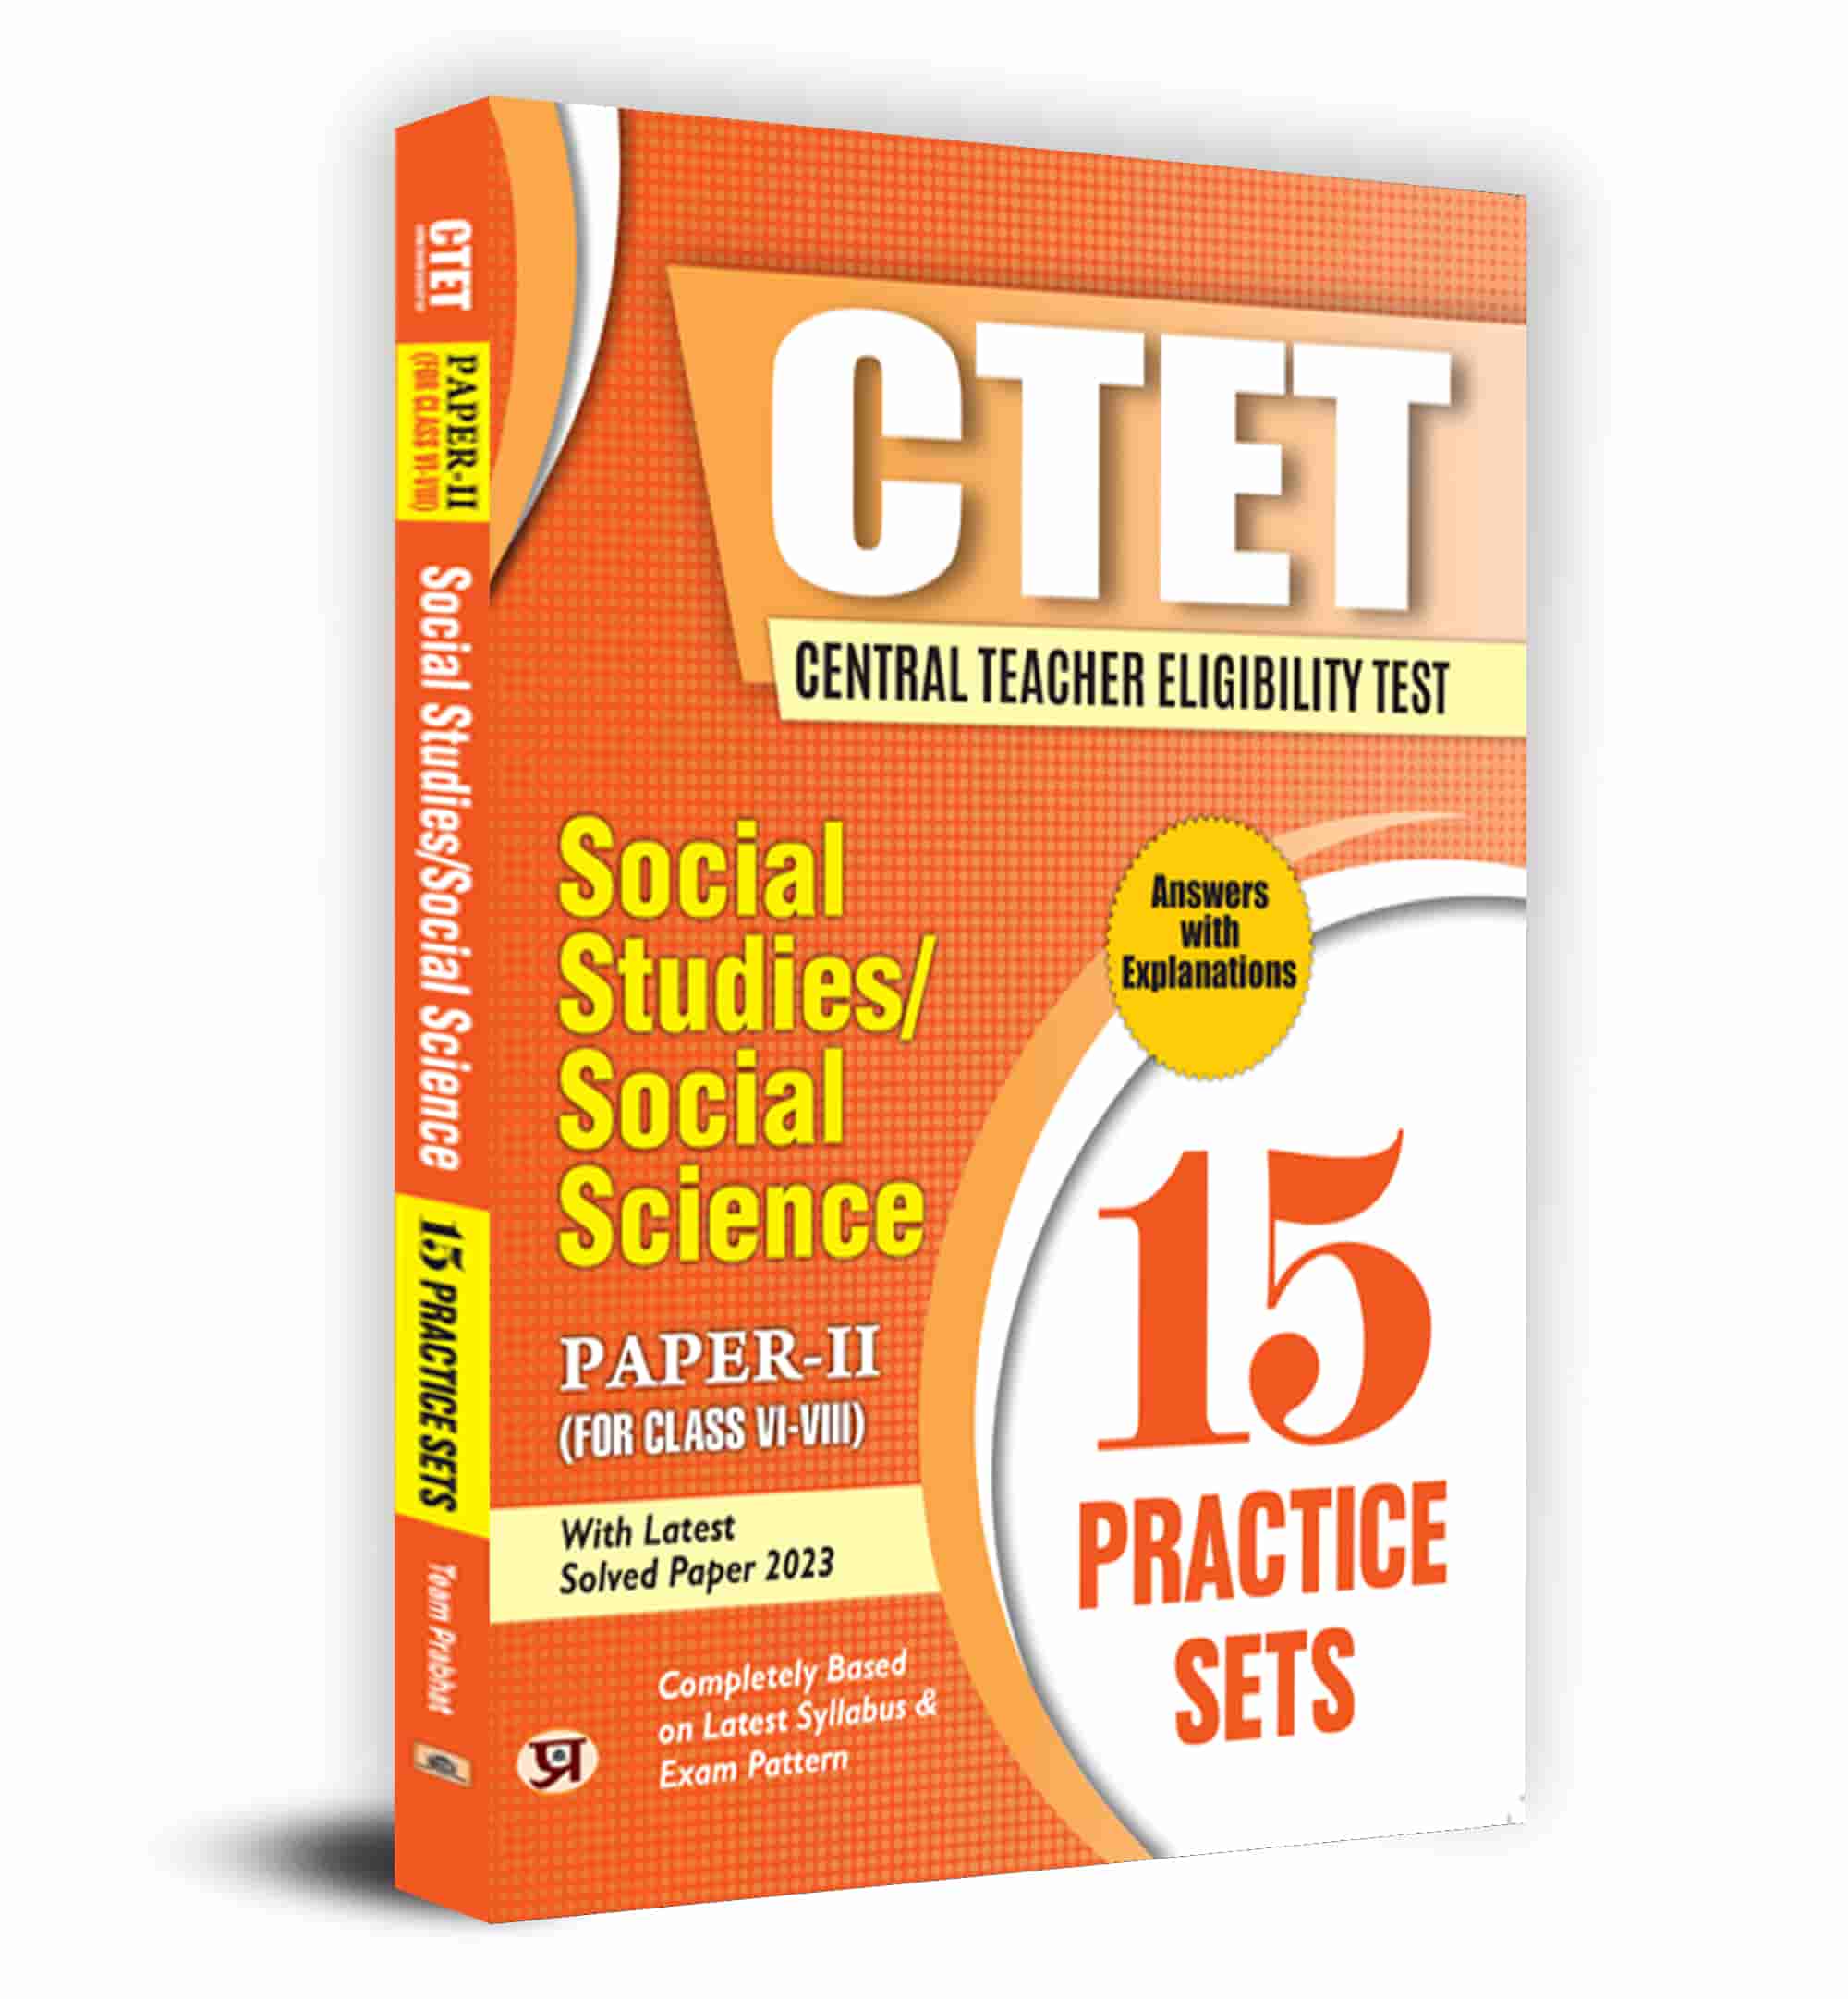 CTET Central Teacher Eligibility Test Paper-2 (Class Vi-Viii) Social Studies/Social Science 15 Practice Sets with Latest Solved Papers (English)